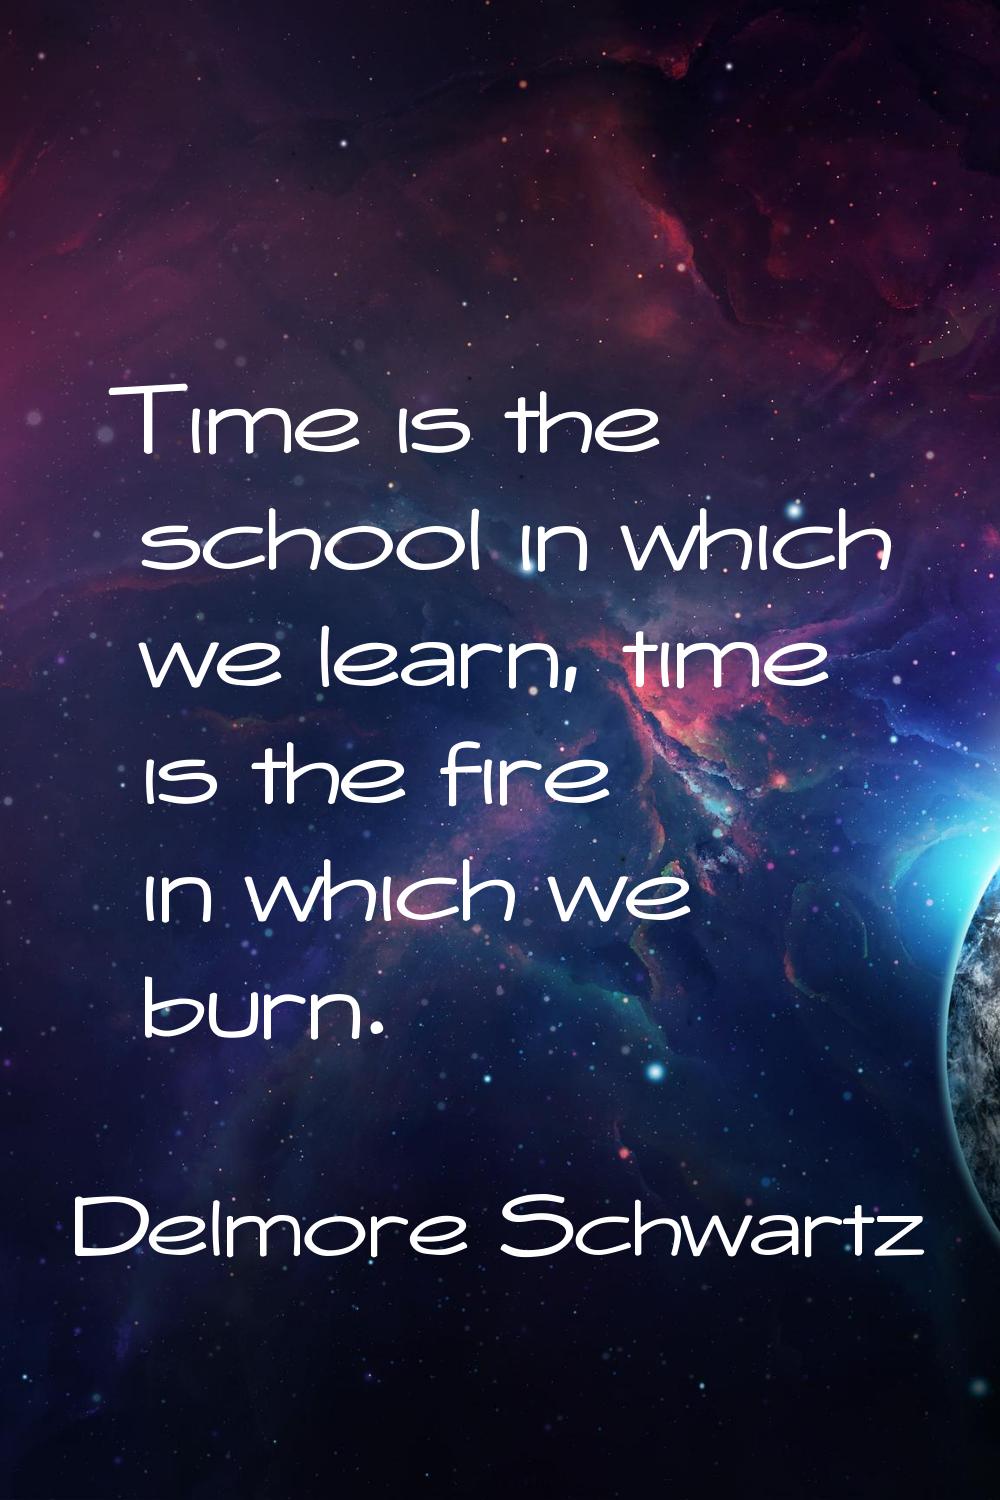 Time is the school in which we learn, time is the fire in which we burn.